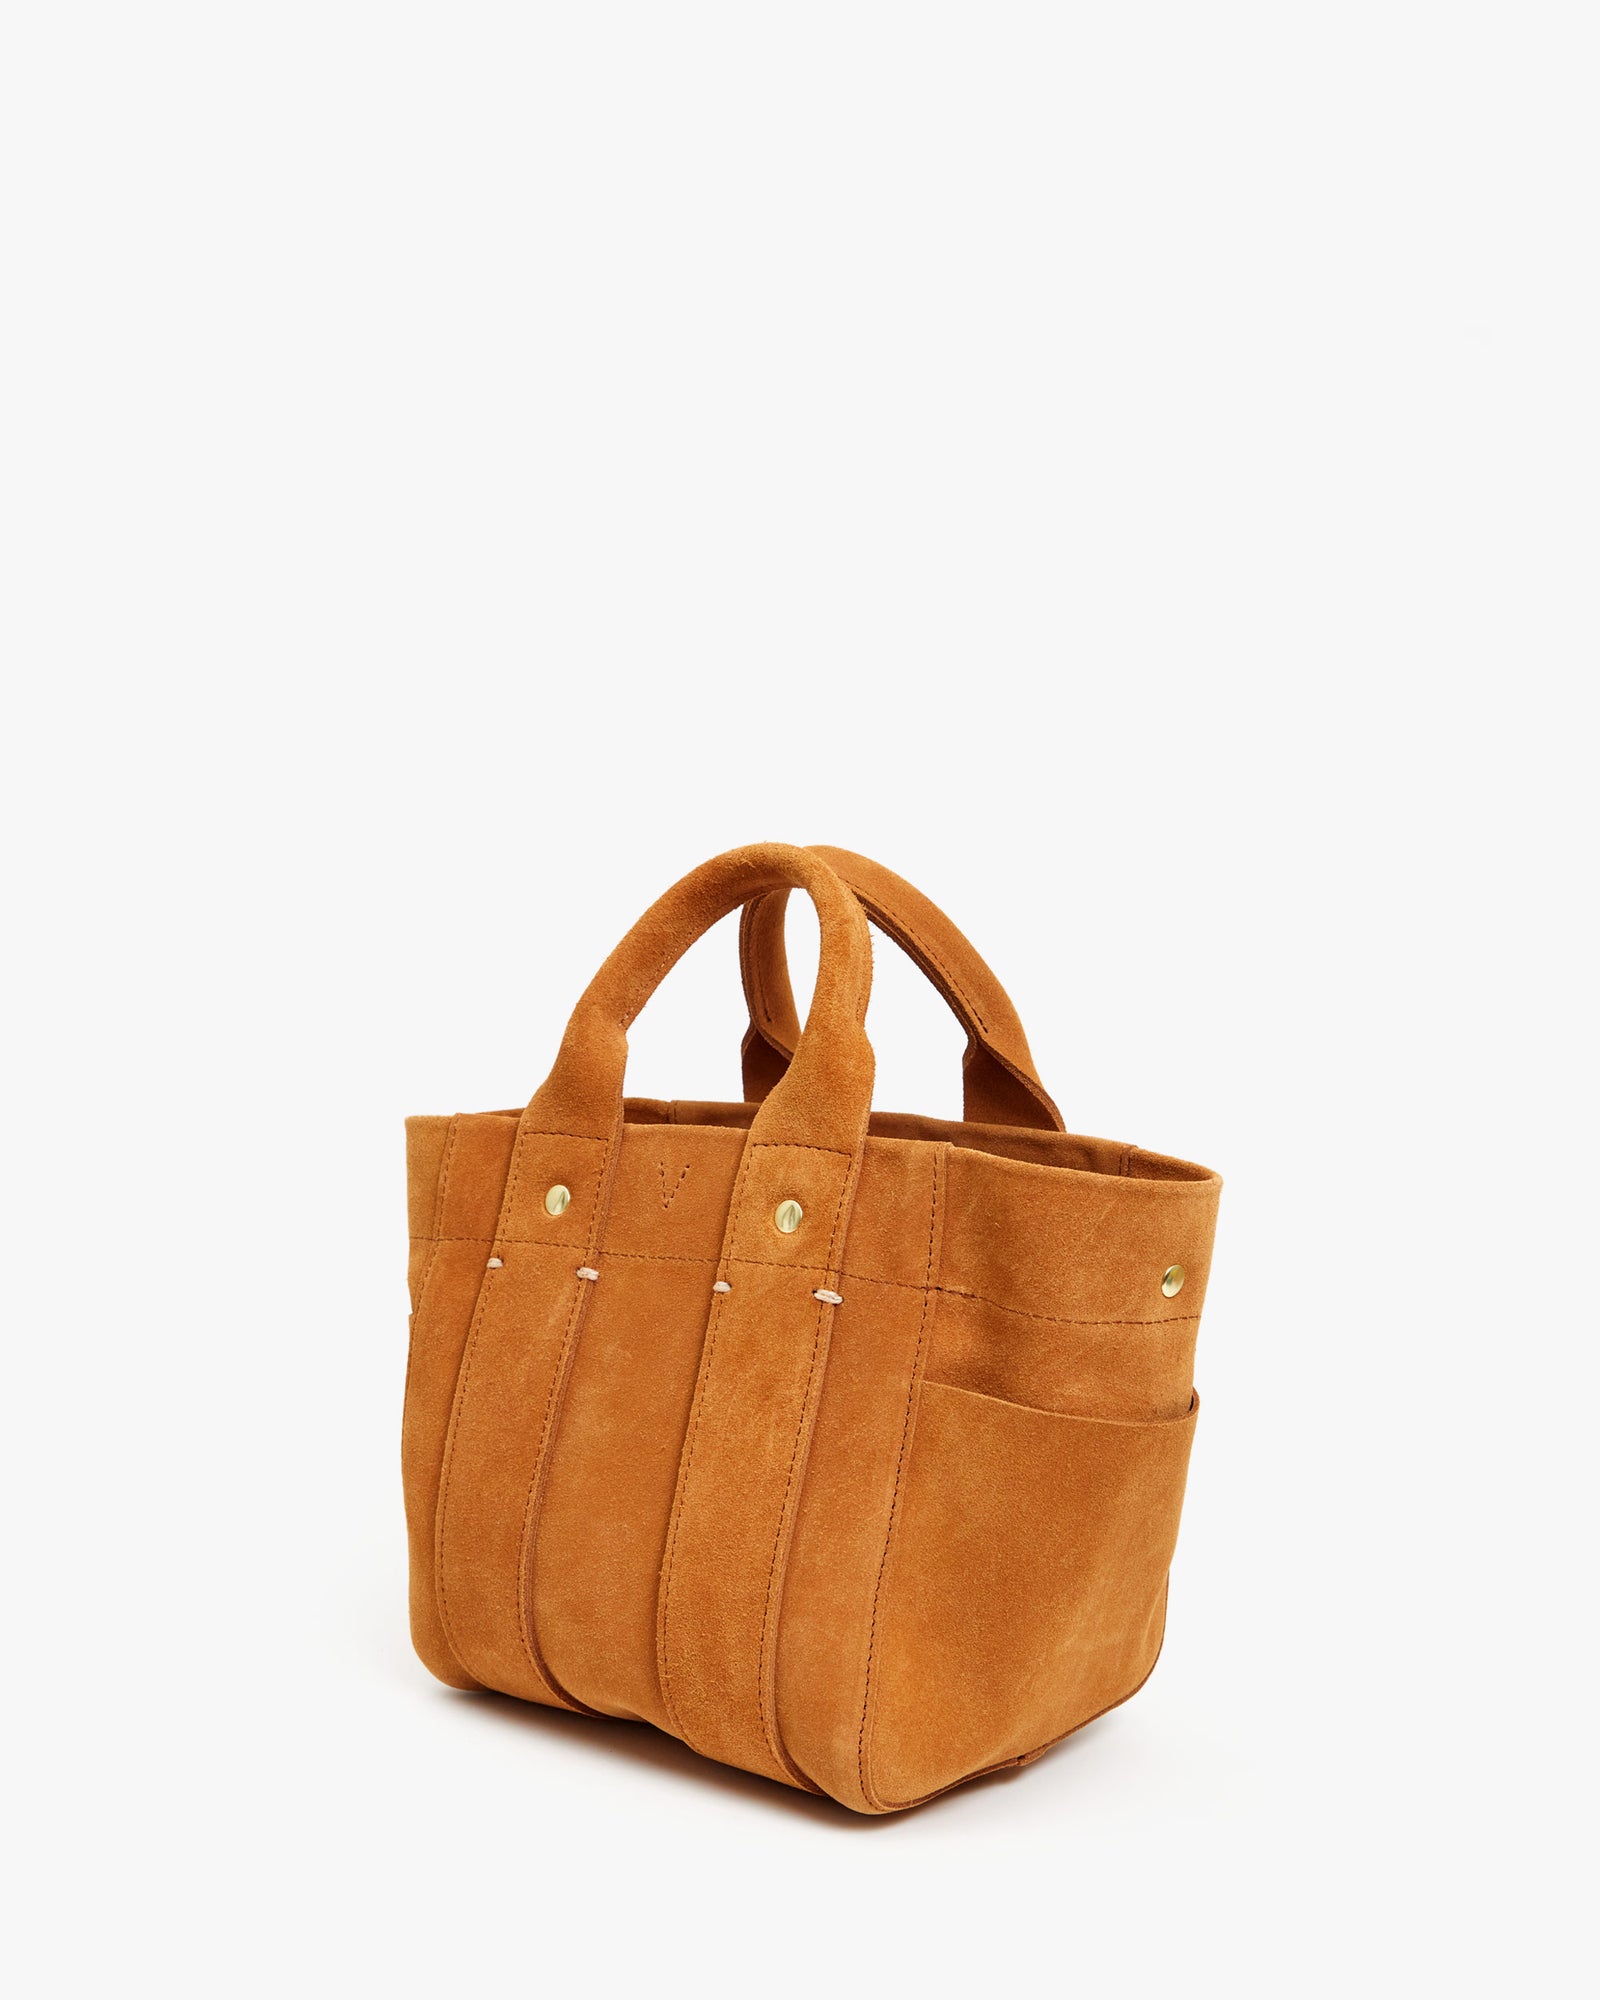 side angle of the Le Petit Box Tote in Camel Suede